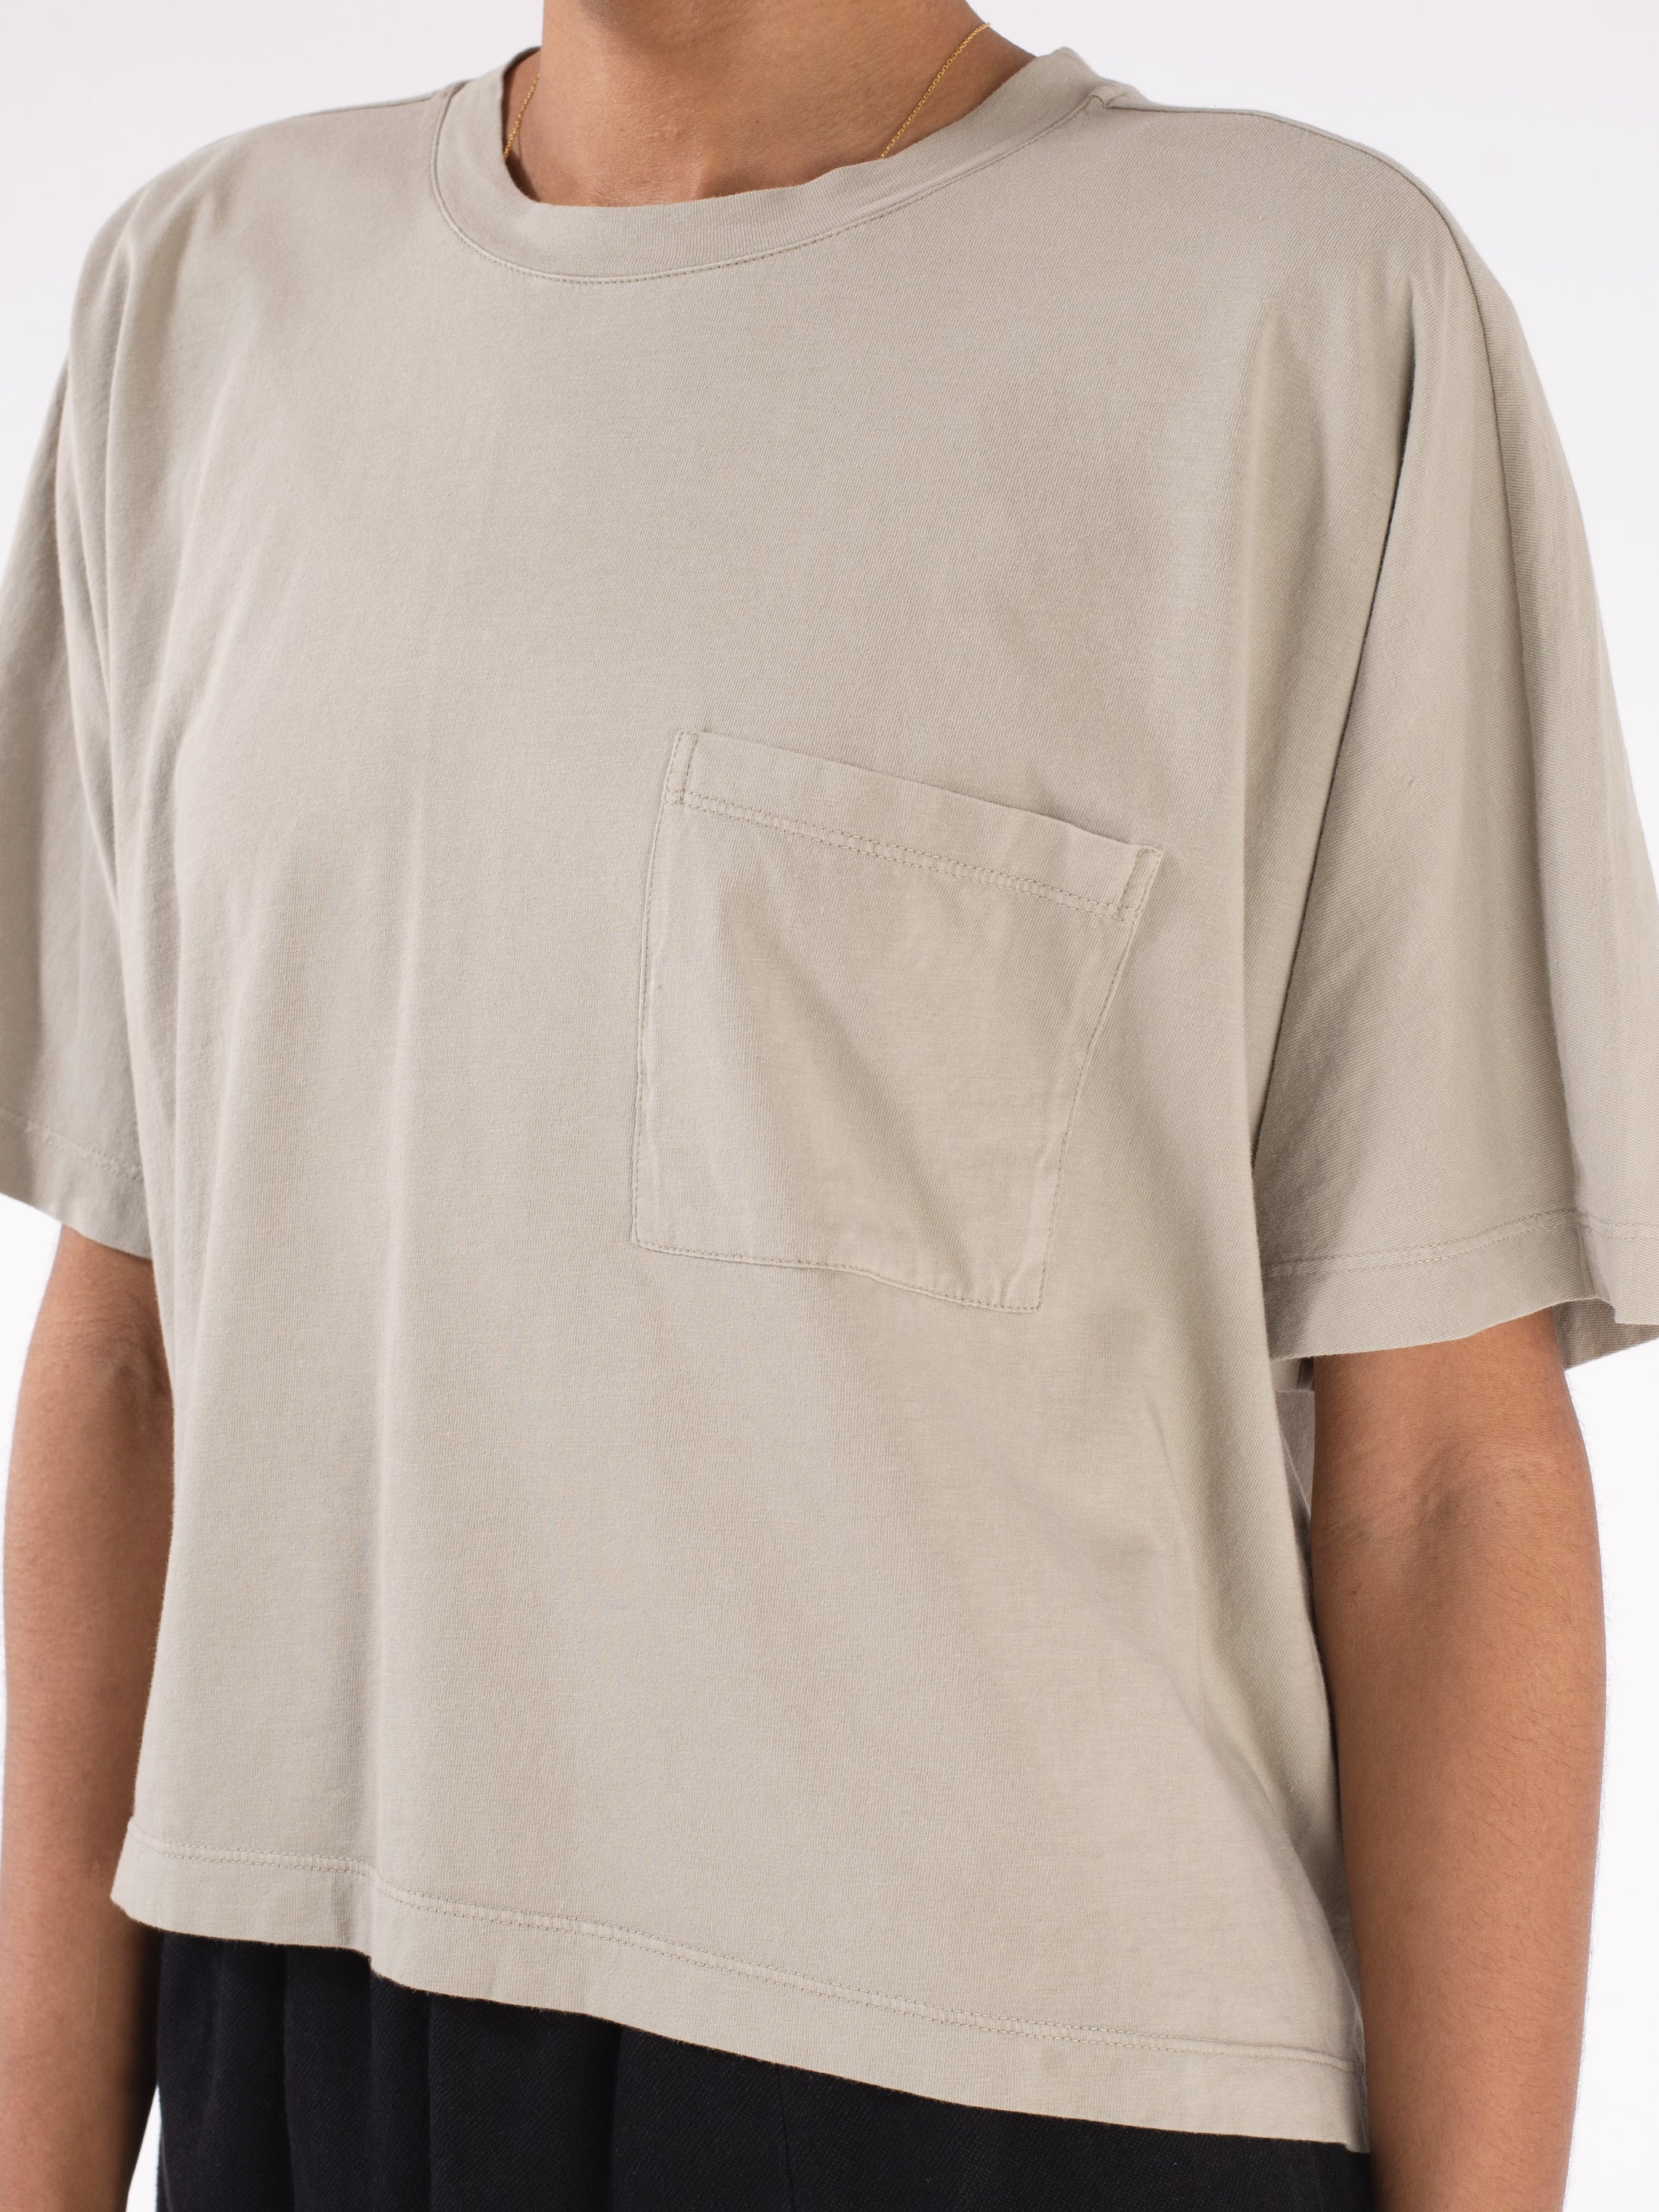 T-Shirt With Small Pocket